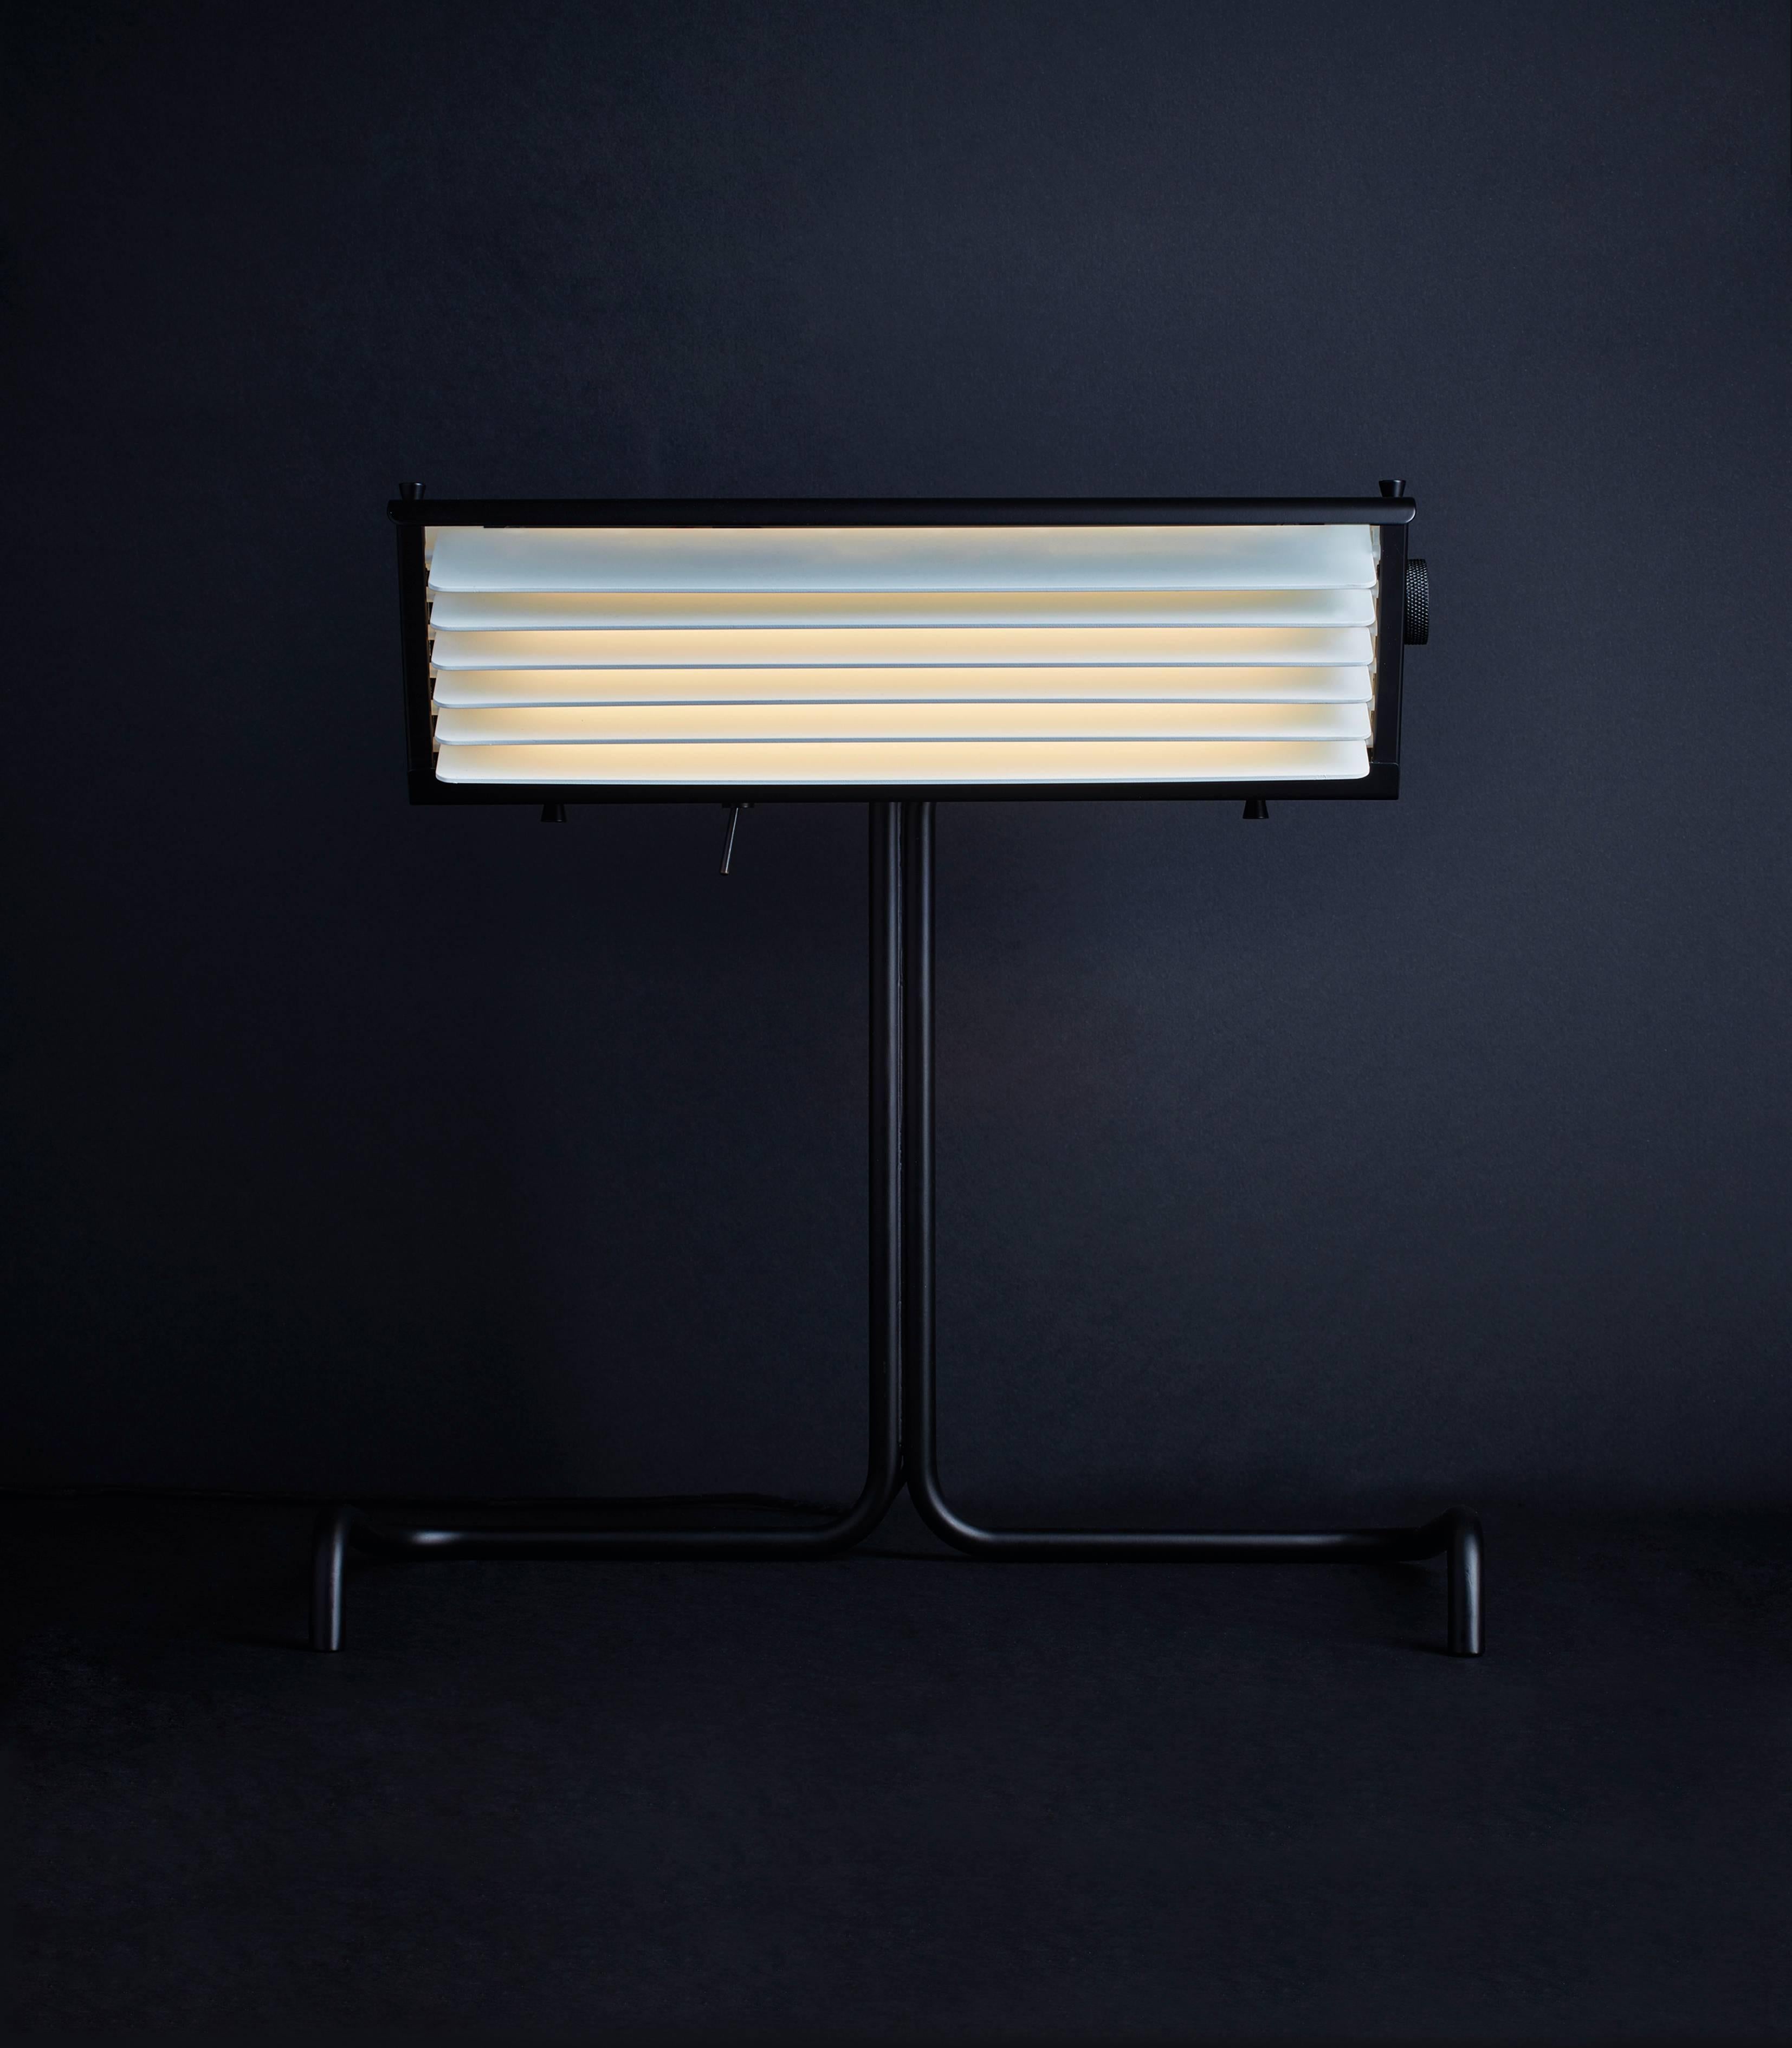 Table Lamp in Steel, French Contemporary Design Reissued by DCW Editions For Sale 2